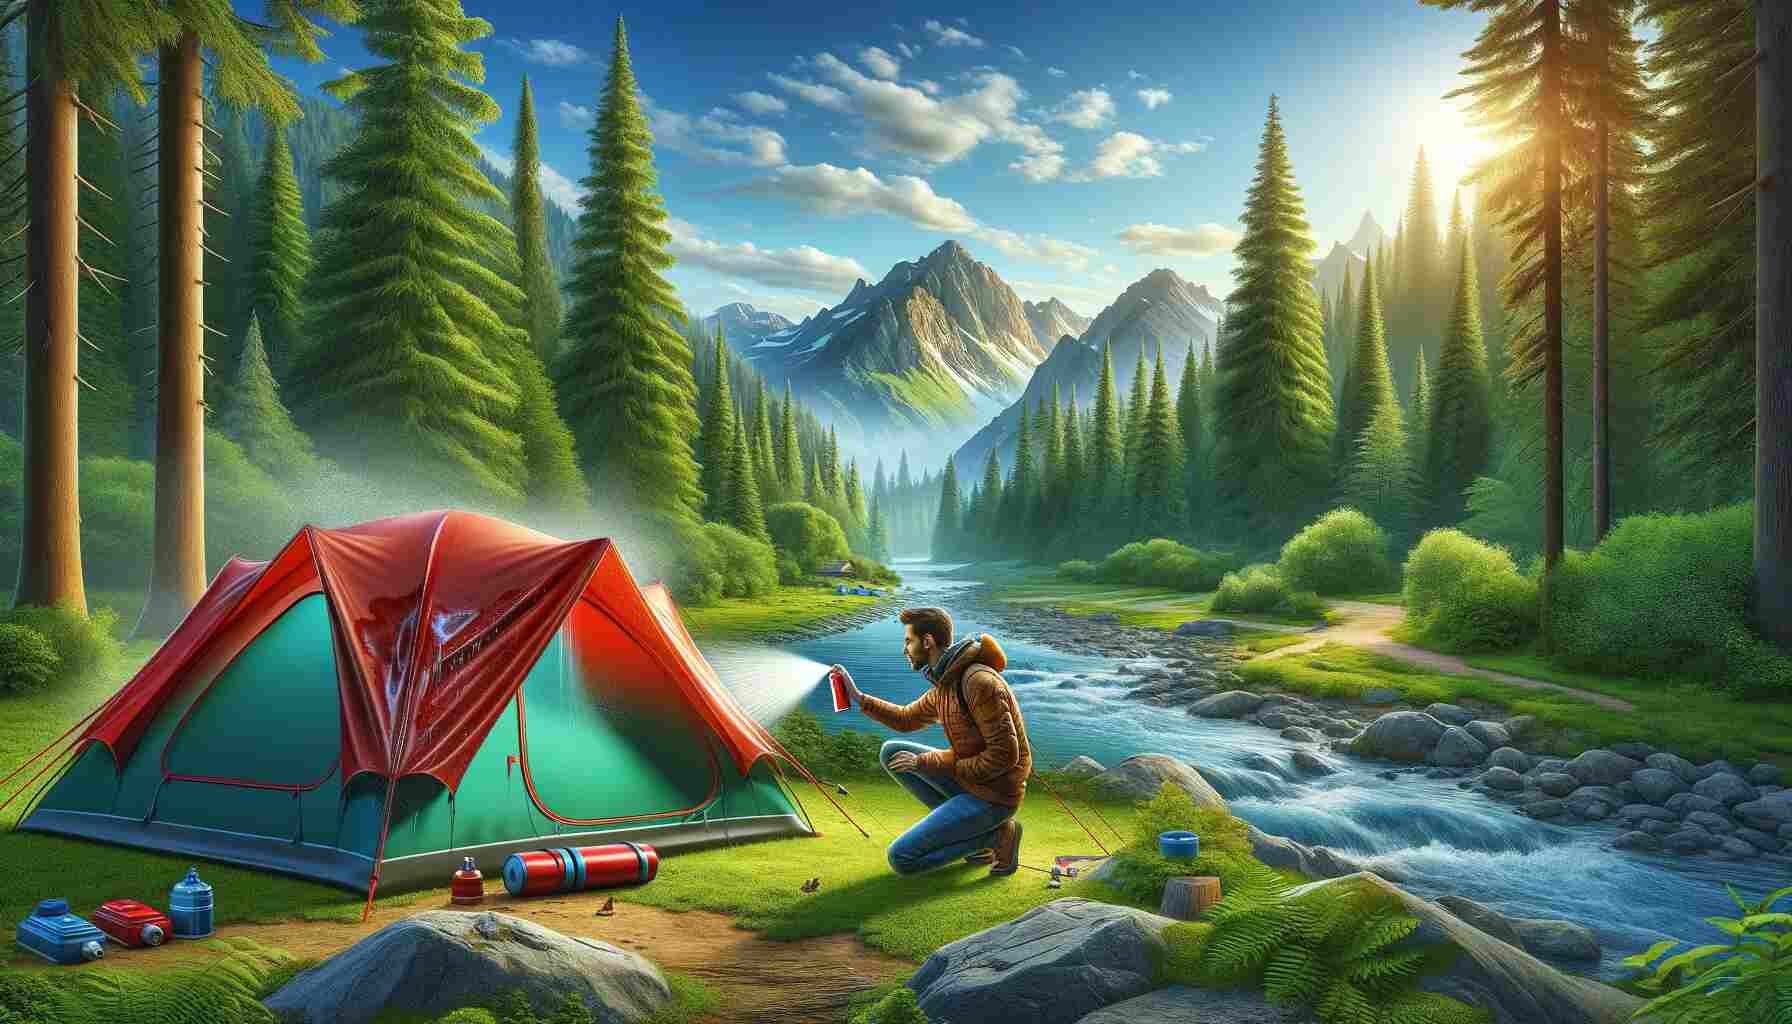 A camper waterproofing a pitched tent in a scenic forest setting, using a waterproofing spray. The vibrant scene includes lush green trees, a clear blue sky, a stream, and mountains in the background. The tent is bright red, standing out against the natural surroundings.